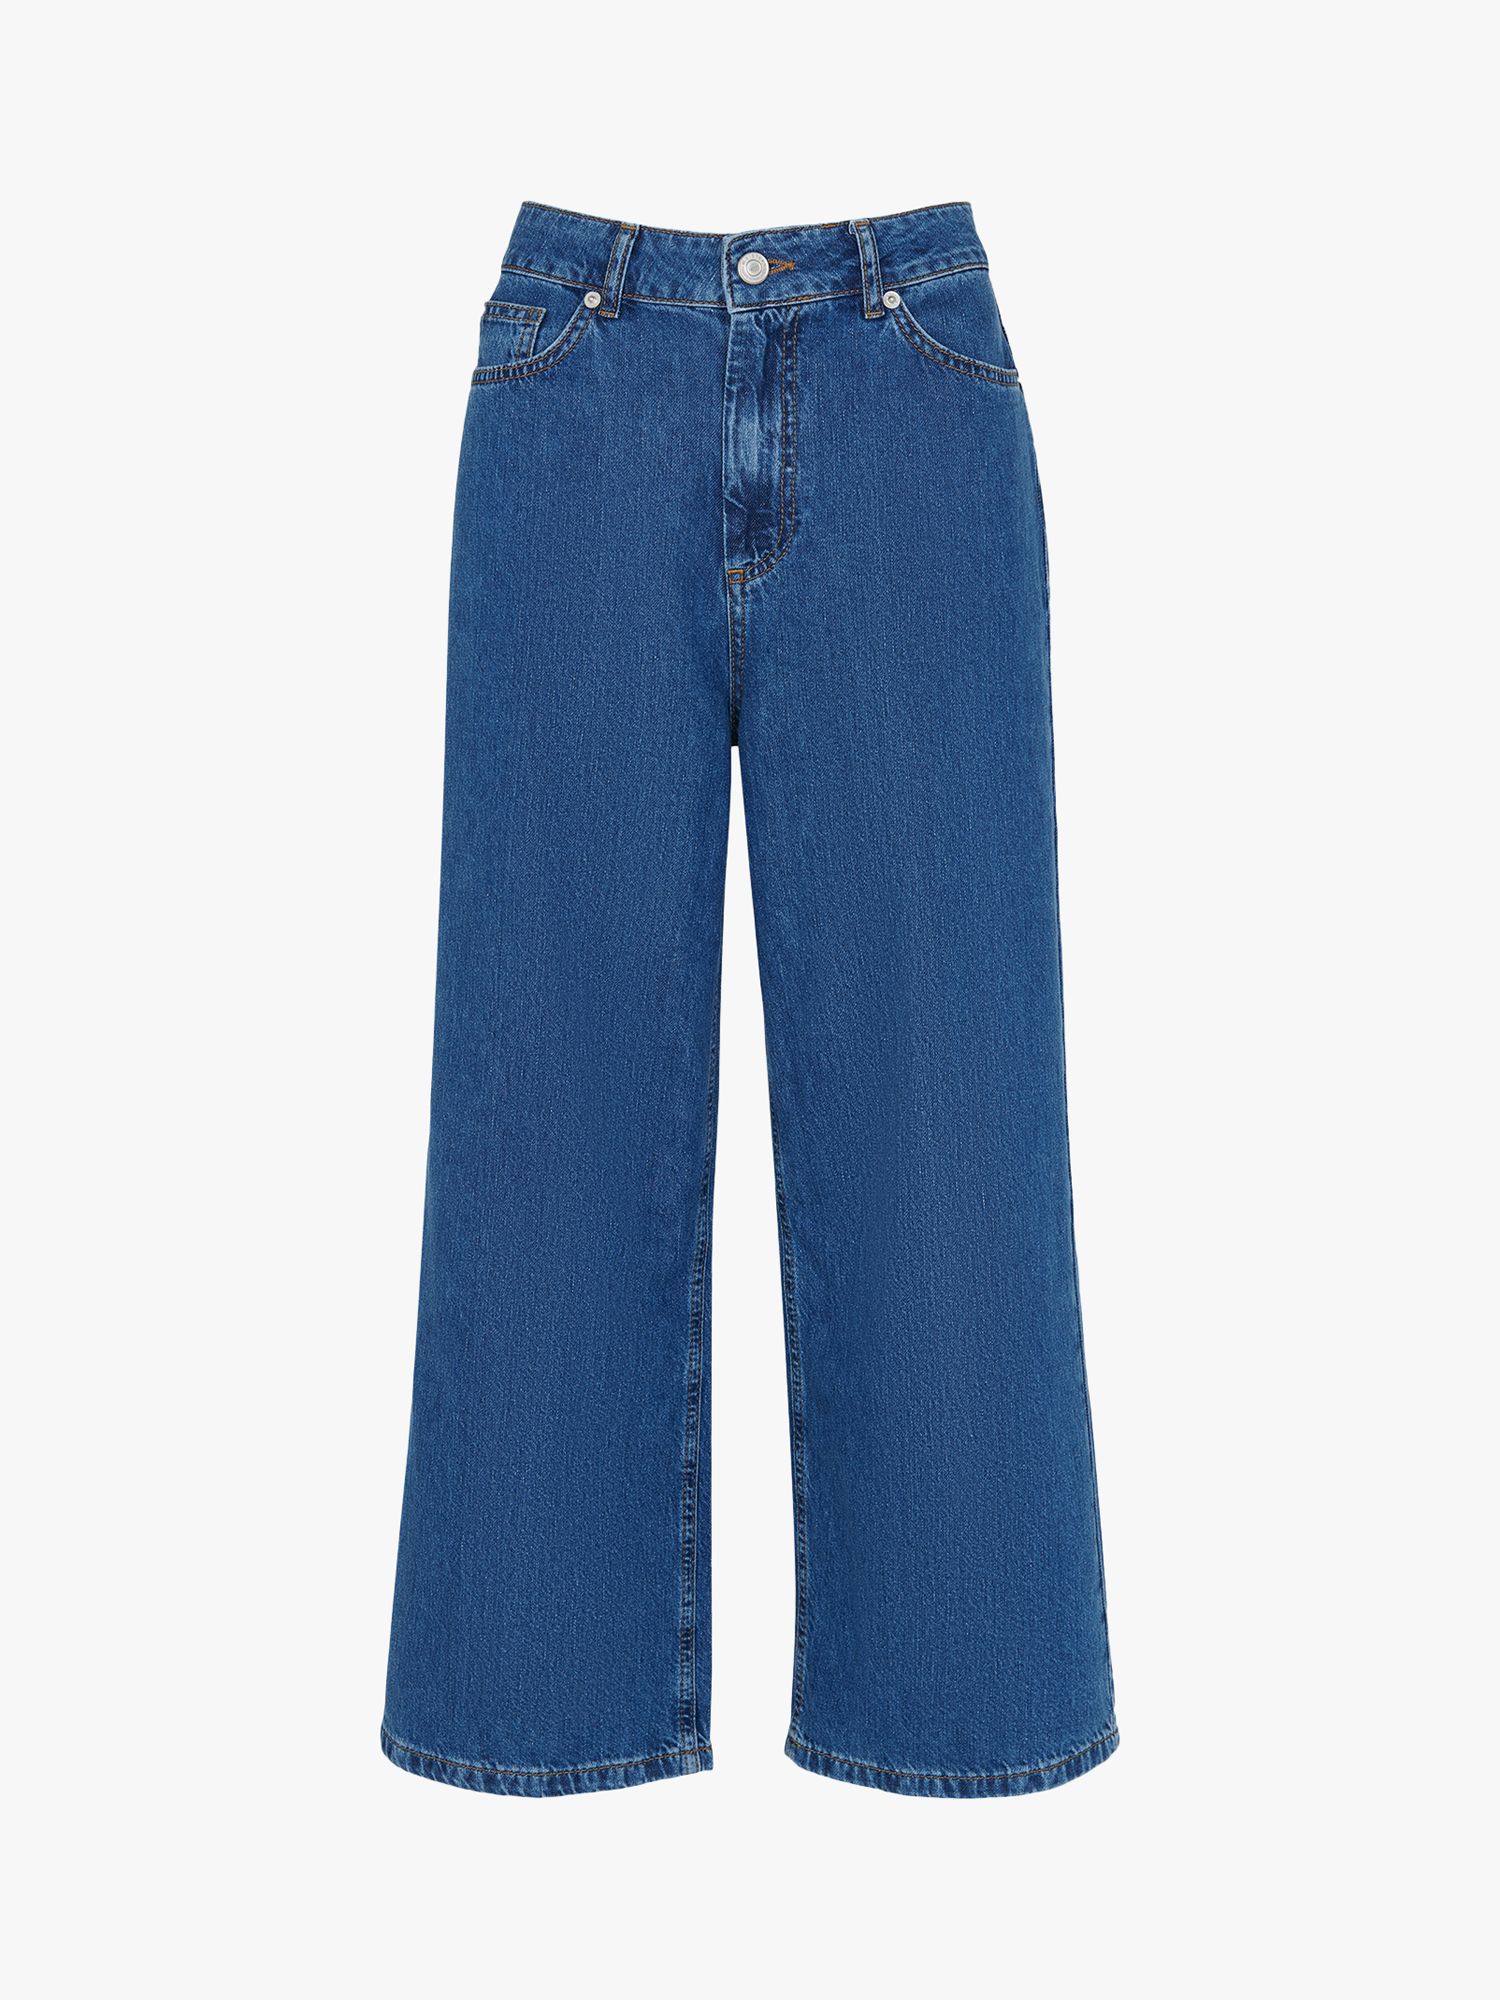 Whistles Wide Leg Cropped Jeans, Denim, 26